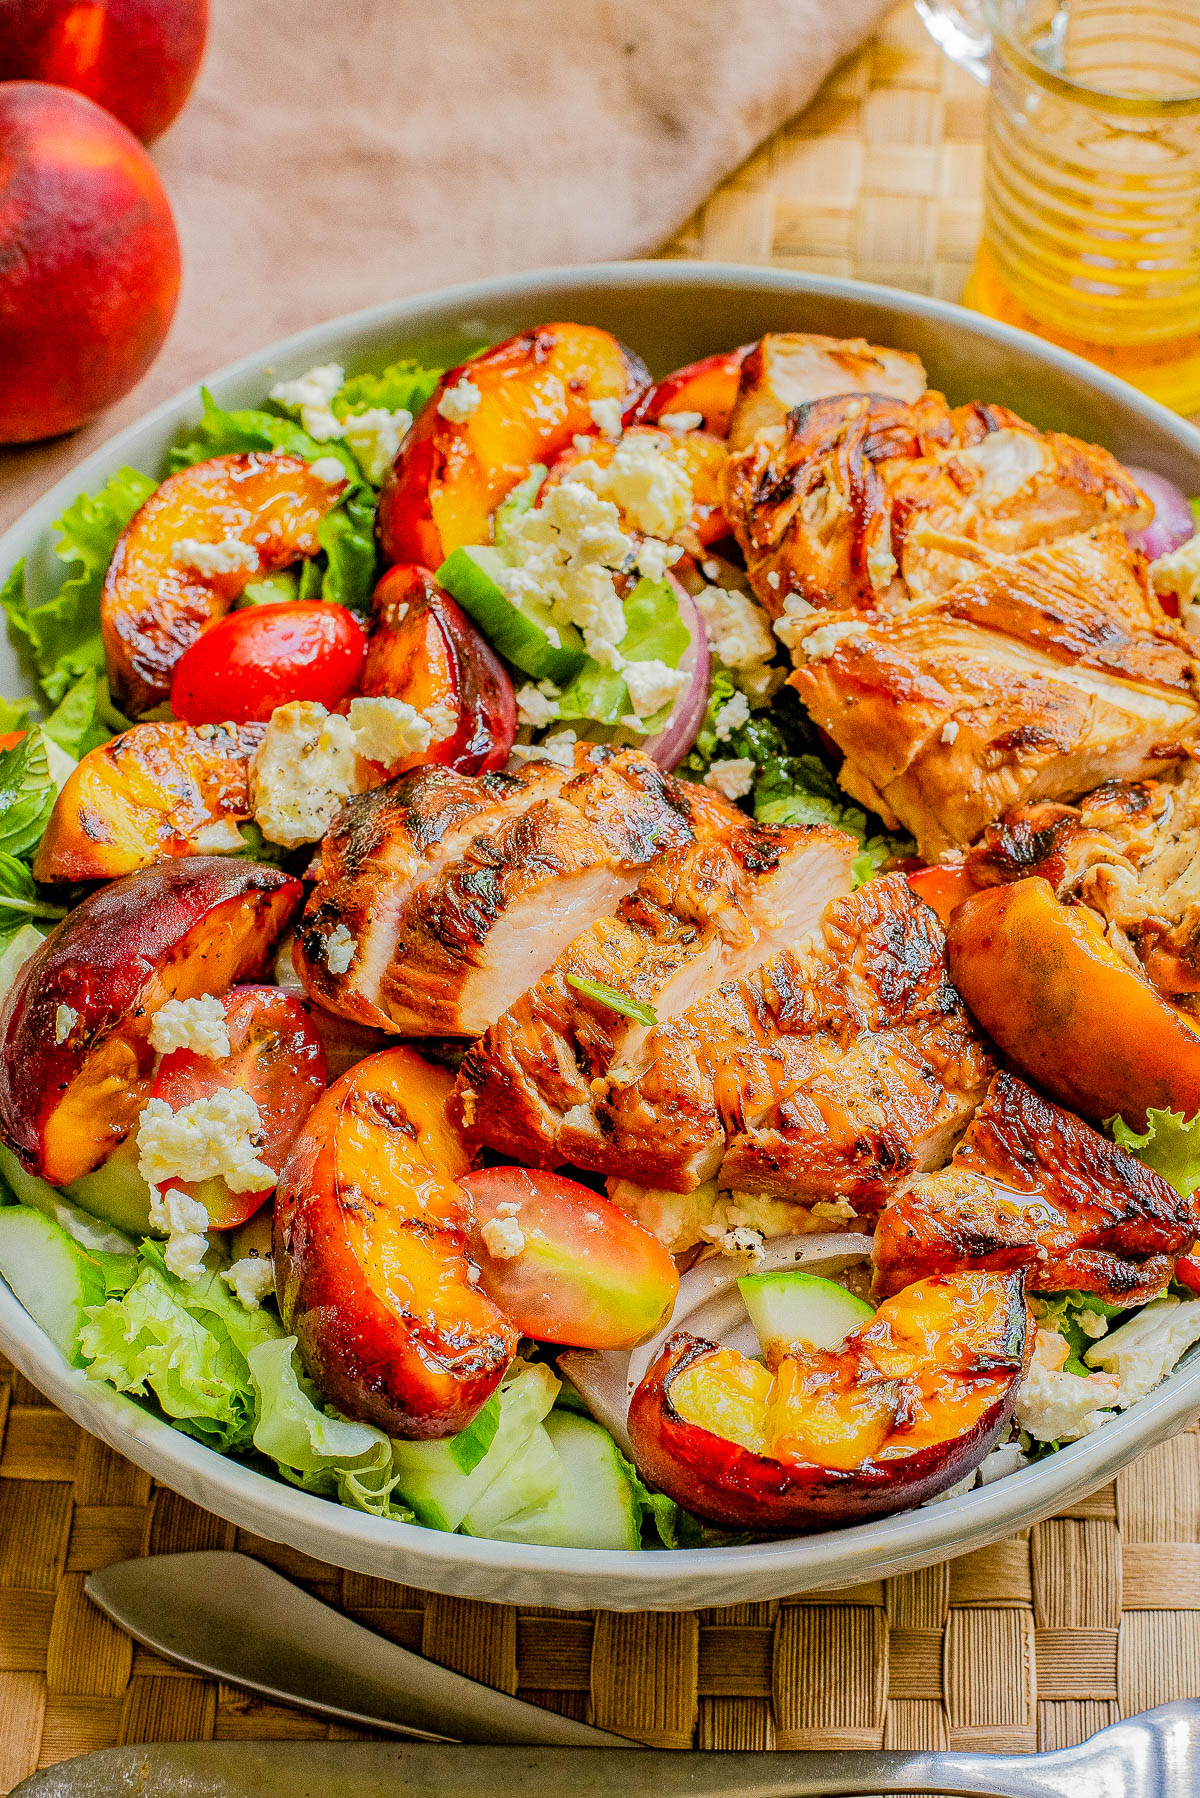 Grilled Peach and Chicken Salad with Lemon Vinaigrette — 🍑🥗🍋 Fresh peaches are grilled quickly on both sides before being tossed with juicy grilled chicken, crisp lettuce, salty feta, fresh mint, tomatoes, and more! Grilling peaches caramelizes them and infuses the salad with so much FLAVOR! Take advantage of seasonal summer produce while it lasts by making this EASY and crave-worthy salad! 